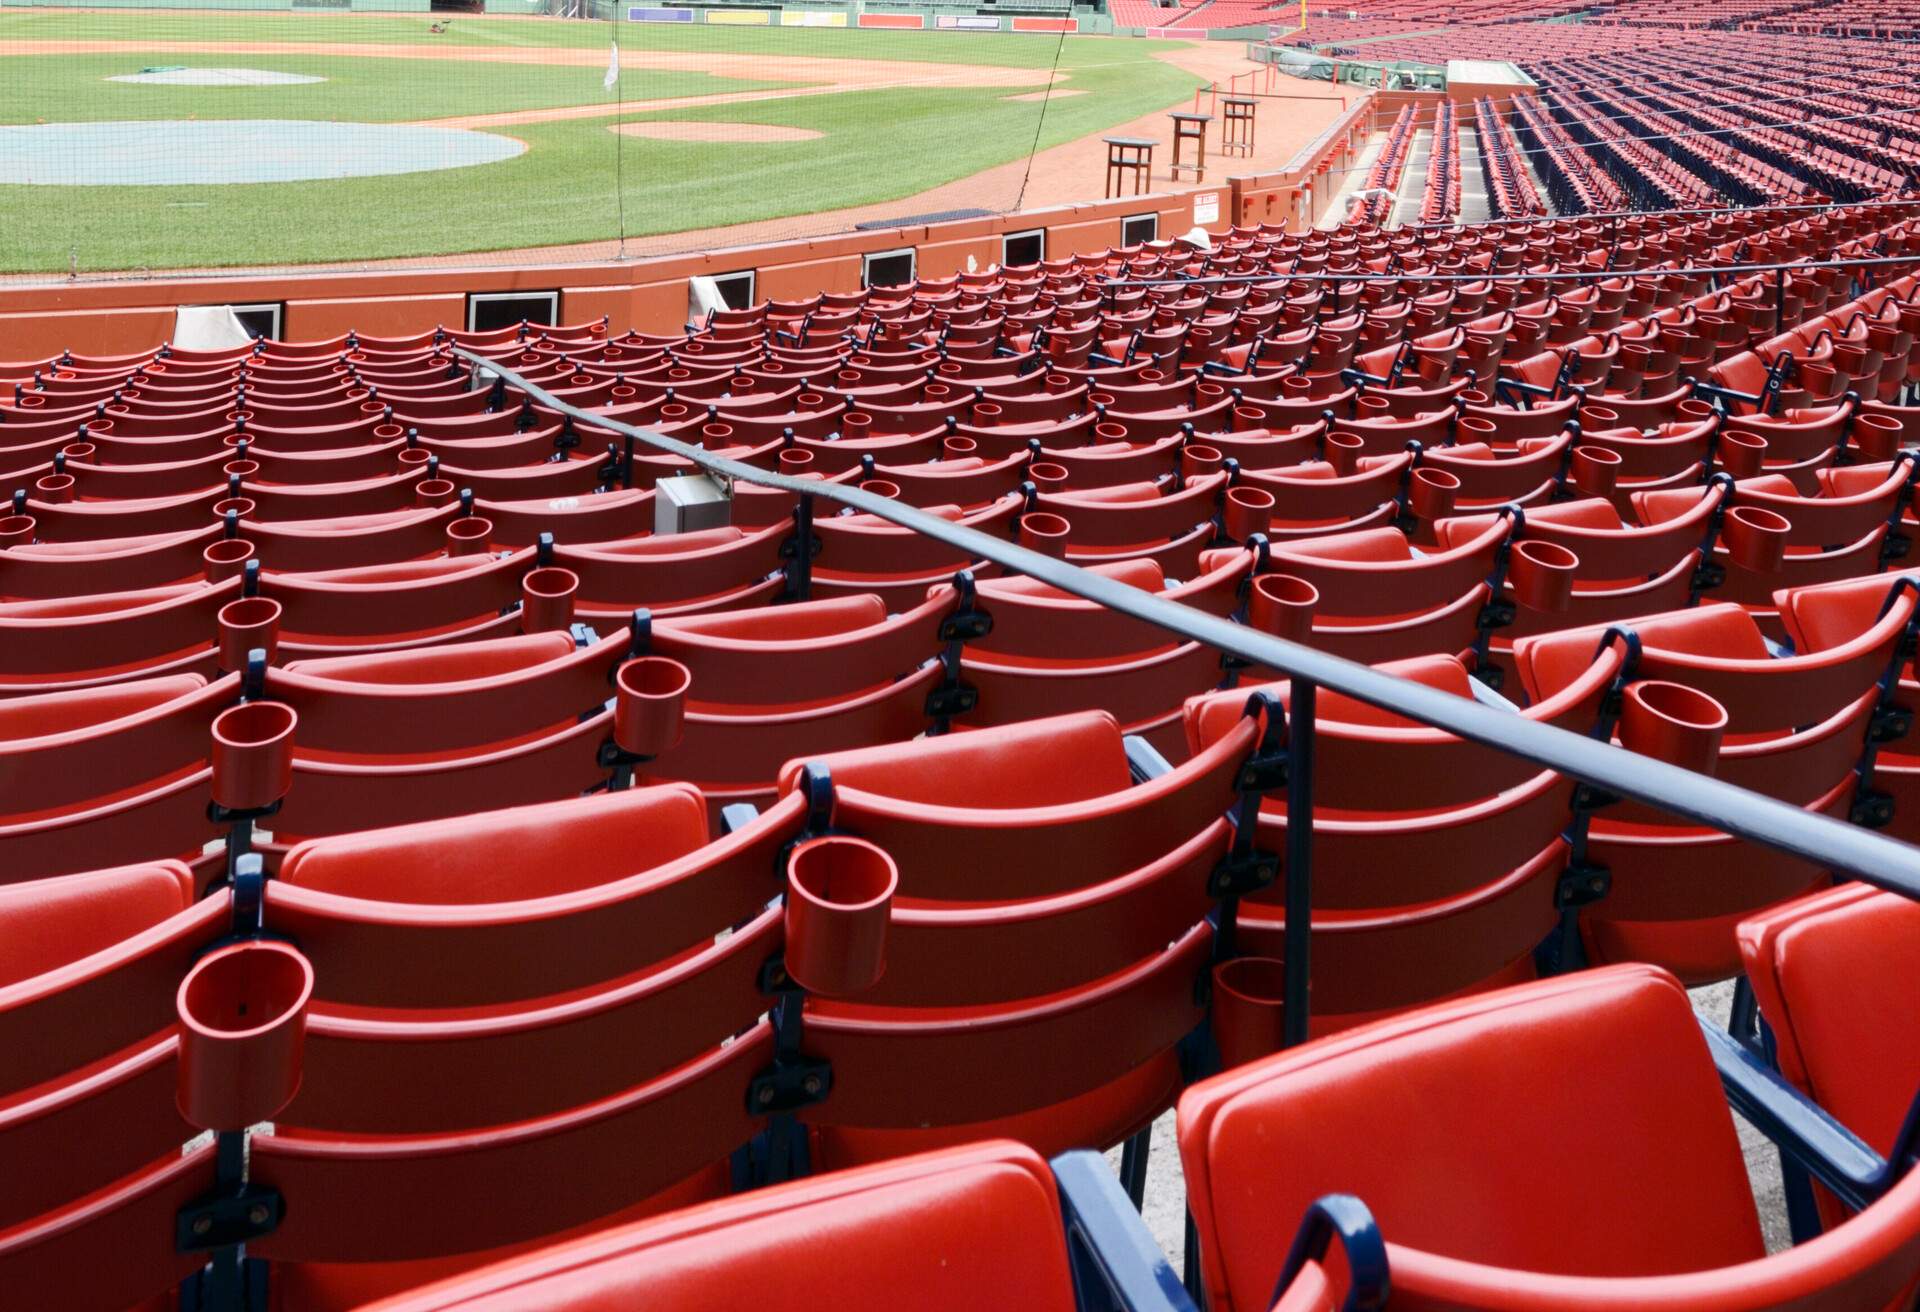 Empty red benches lined per row in a baseball stadium.